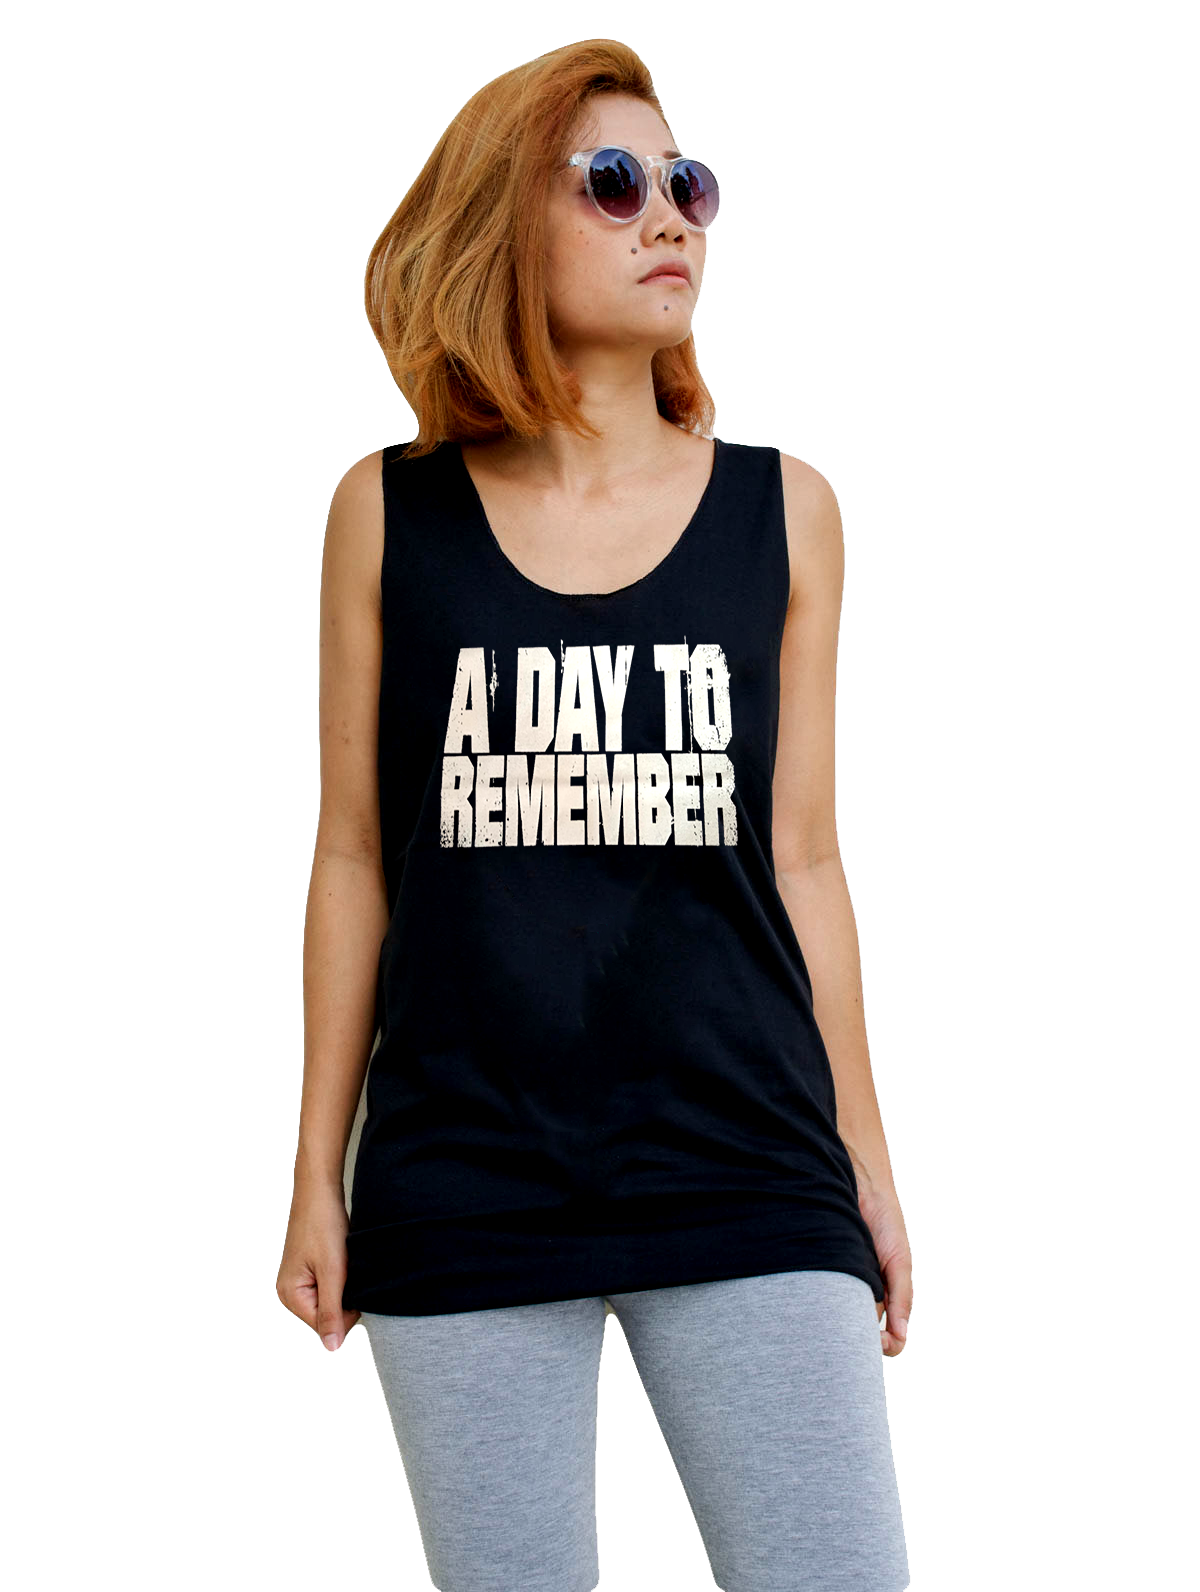 Unisex A Day To Remember Top Tank-Top Singlet vest Sleeveless T-shirt